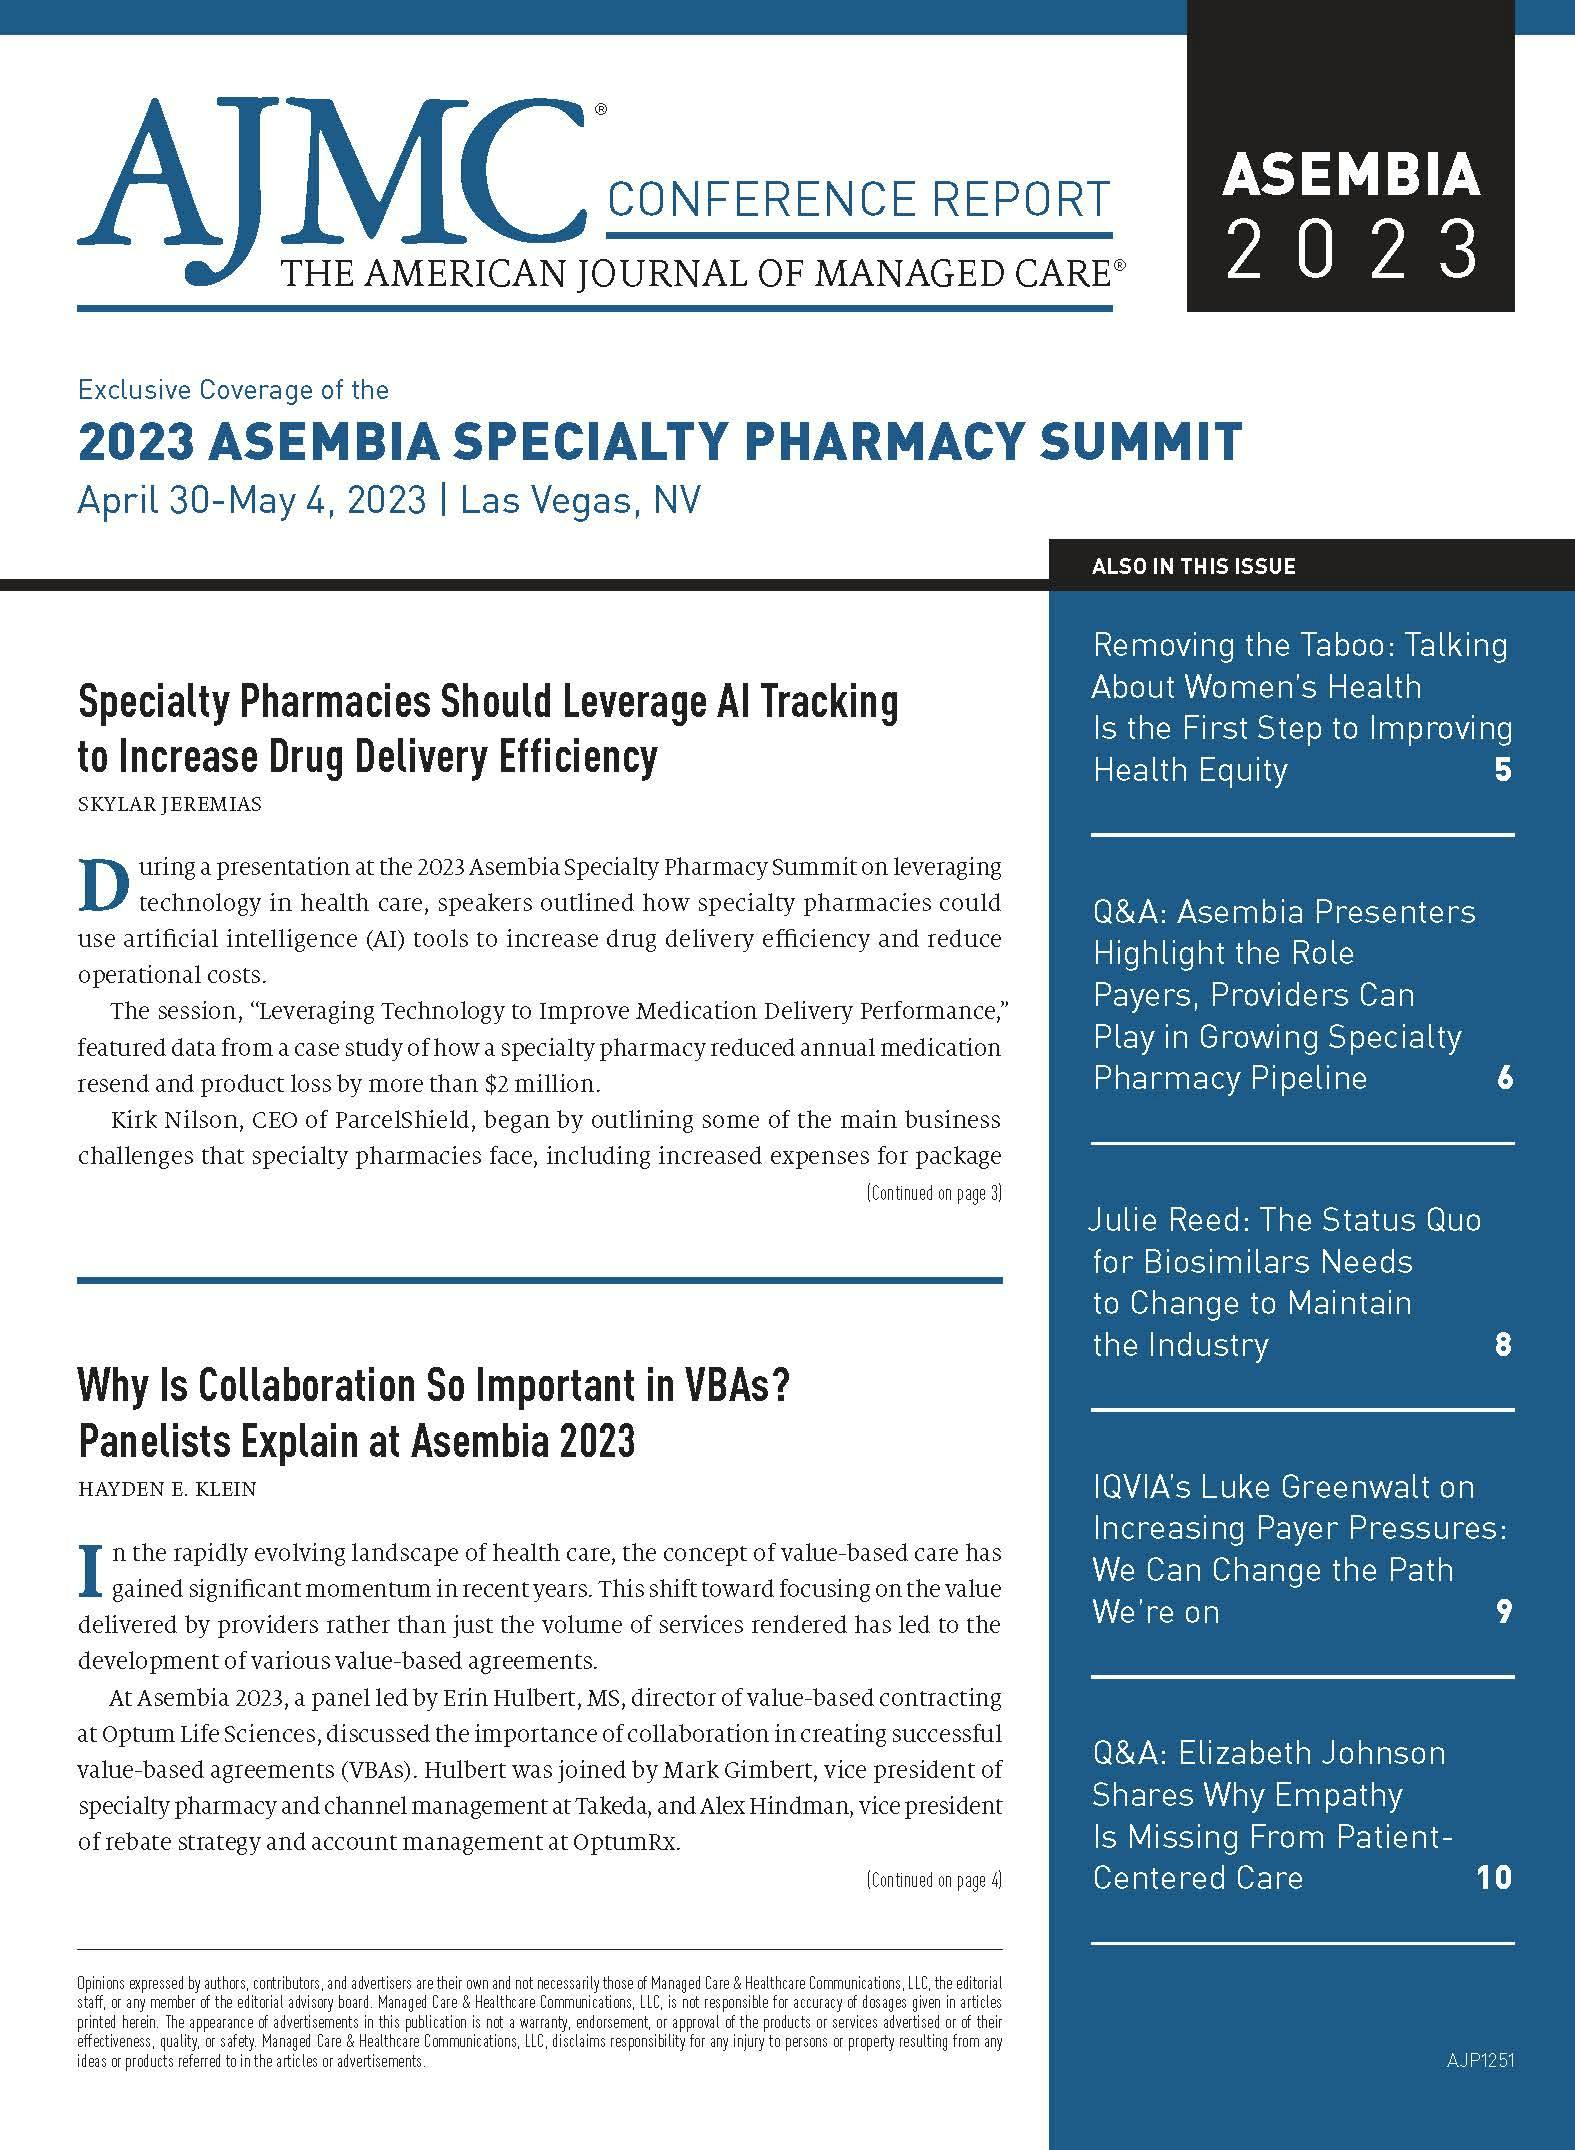 Exclusive Coverage of the 2023 Asembia Specialty Pharmacy Summit